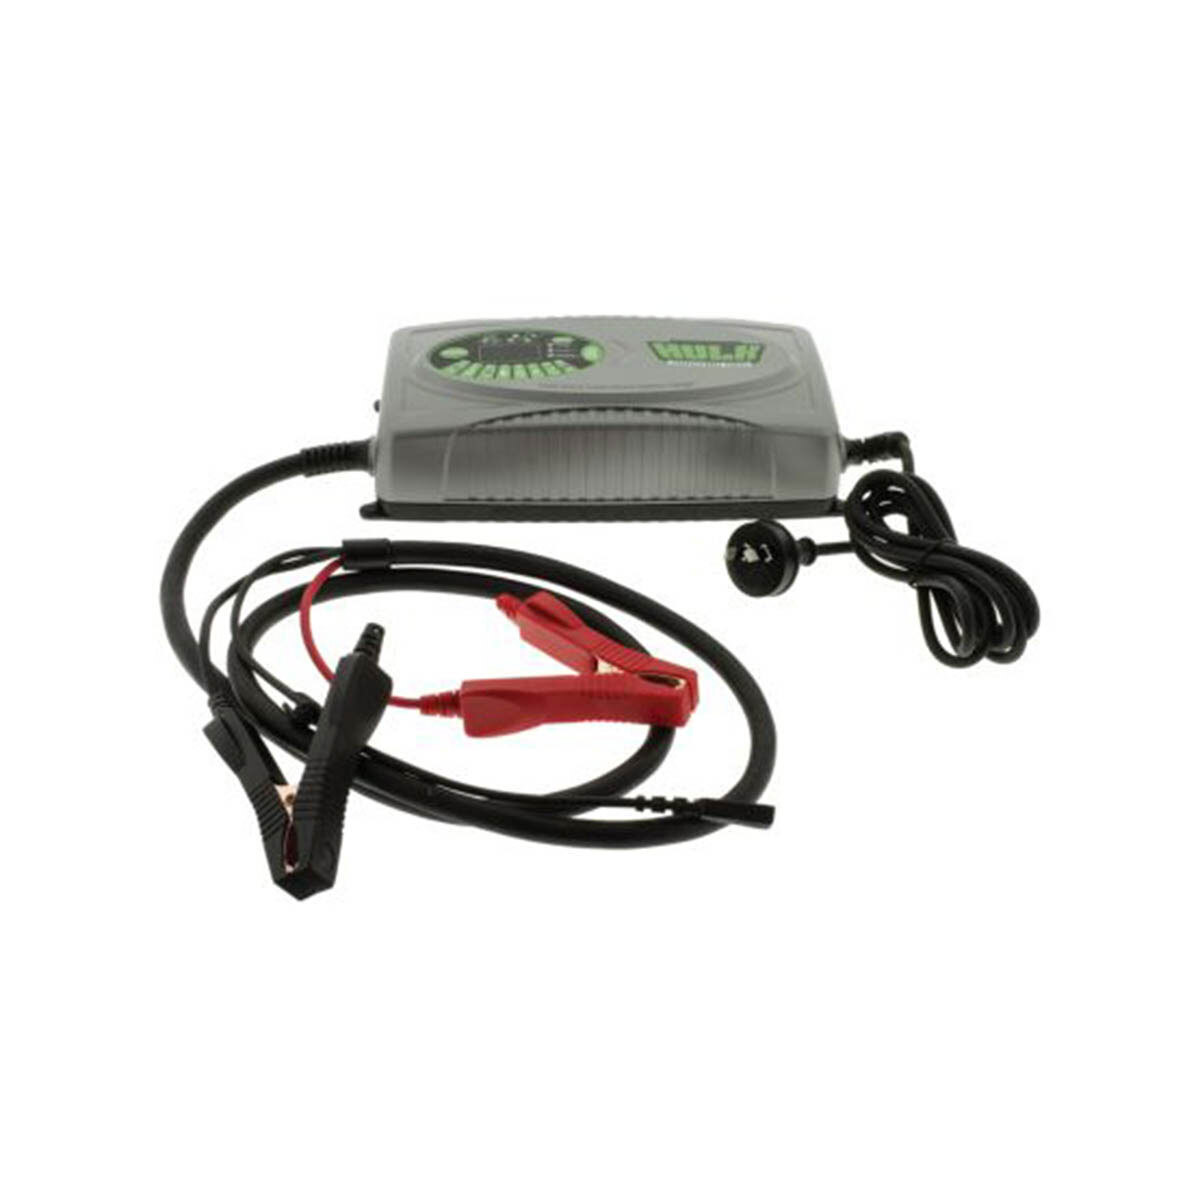 PerfectCharge MCA1225 Charger buy now